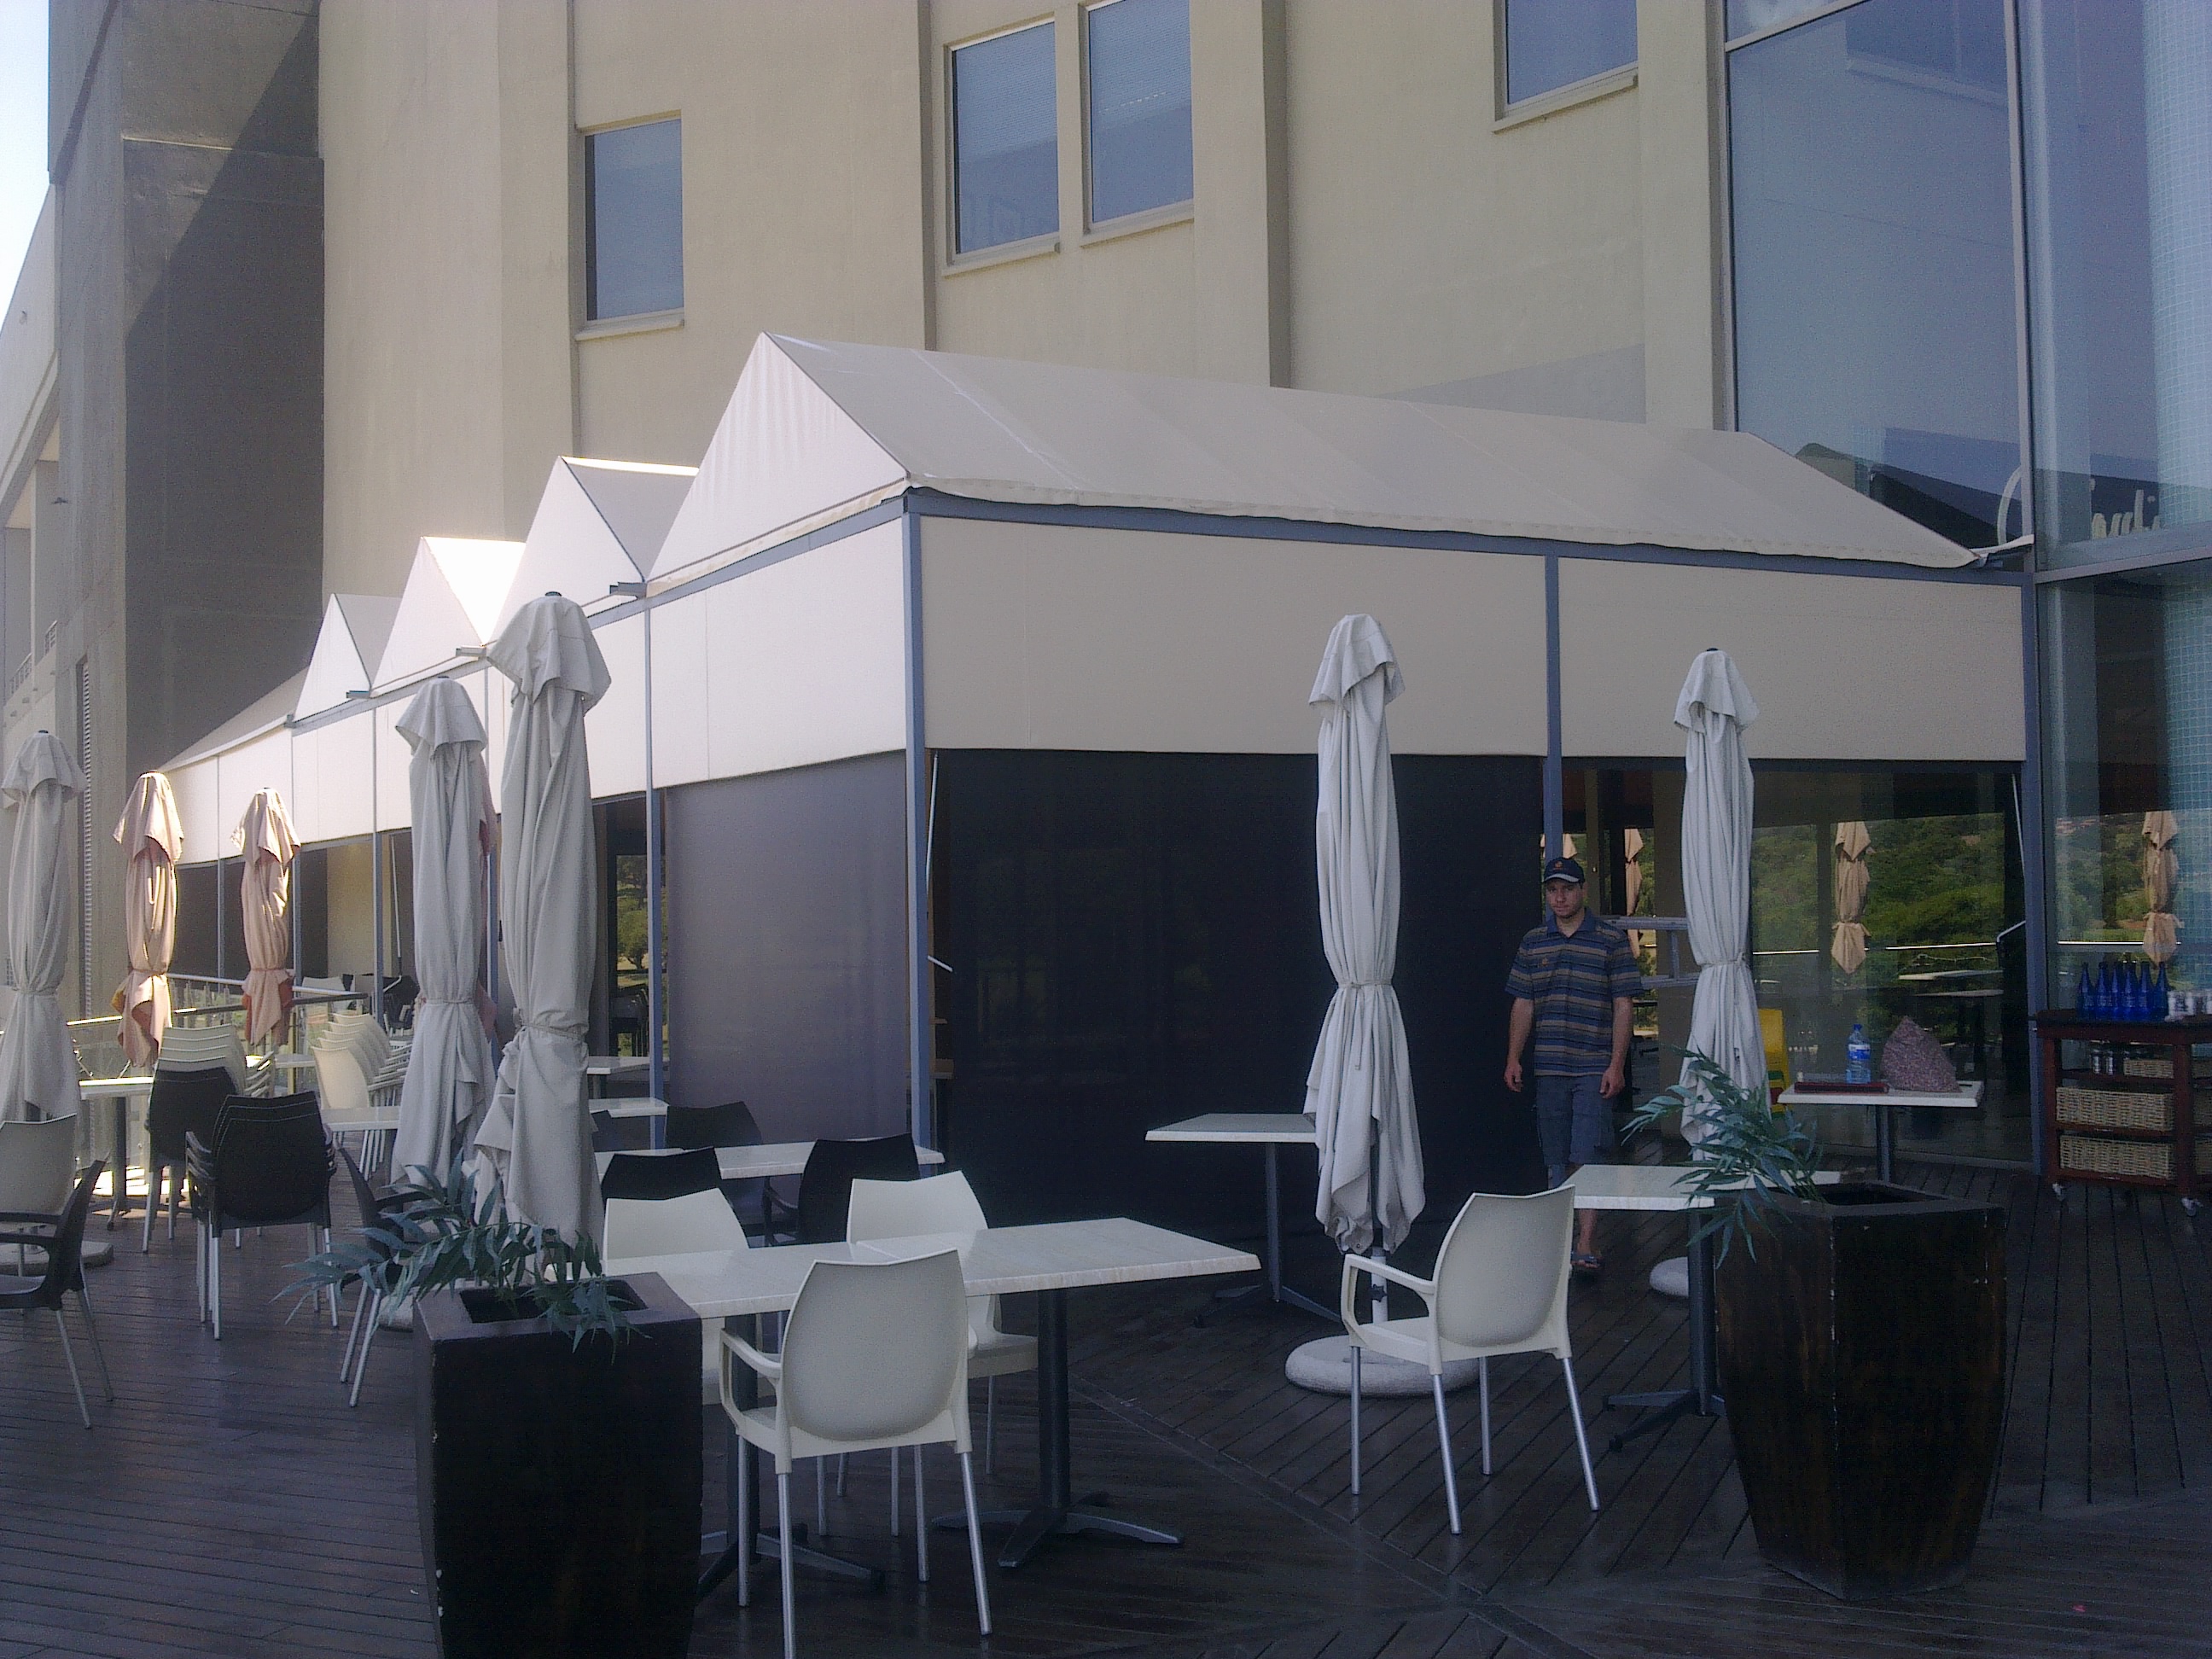 Commercial Awnings Image one for sun projects awnings blinds and patios